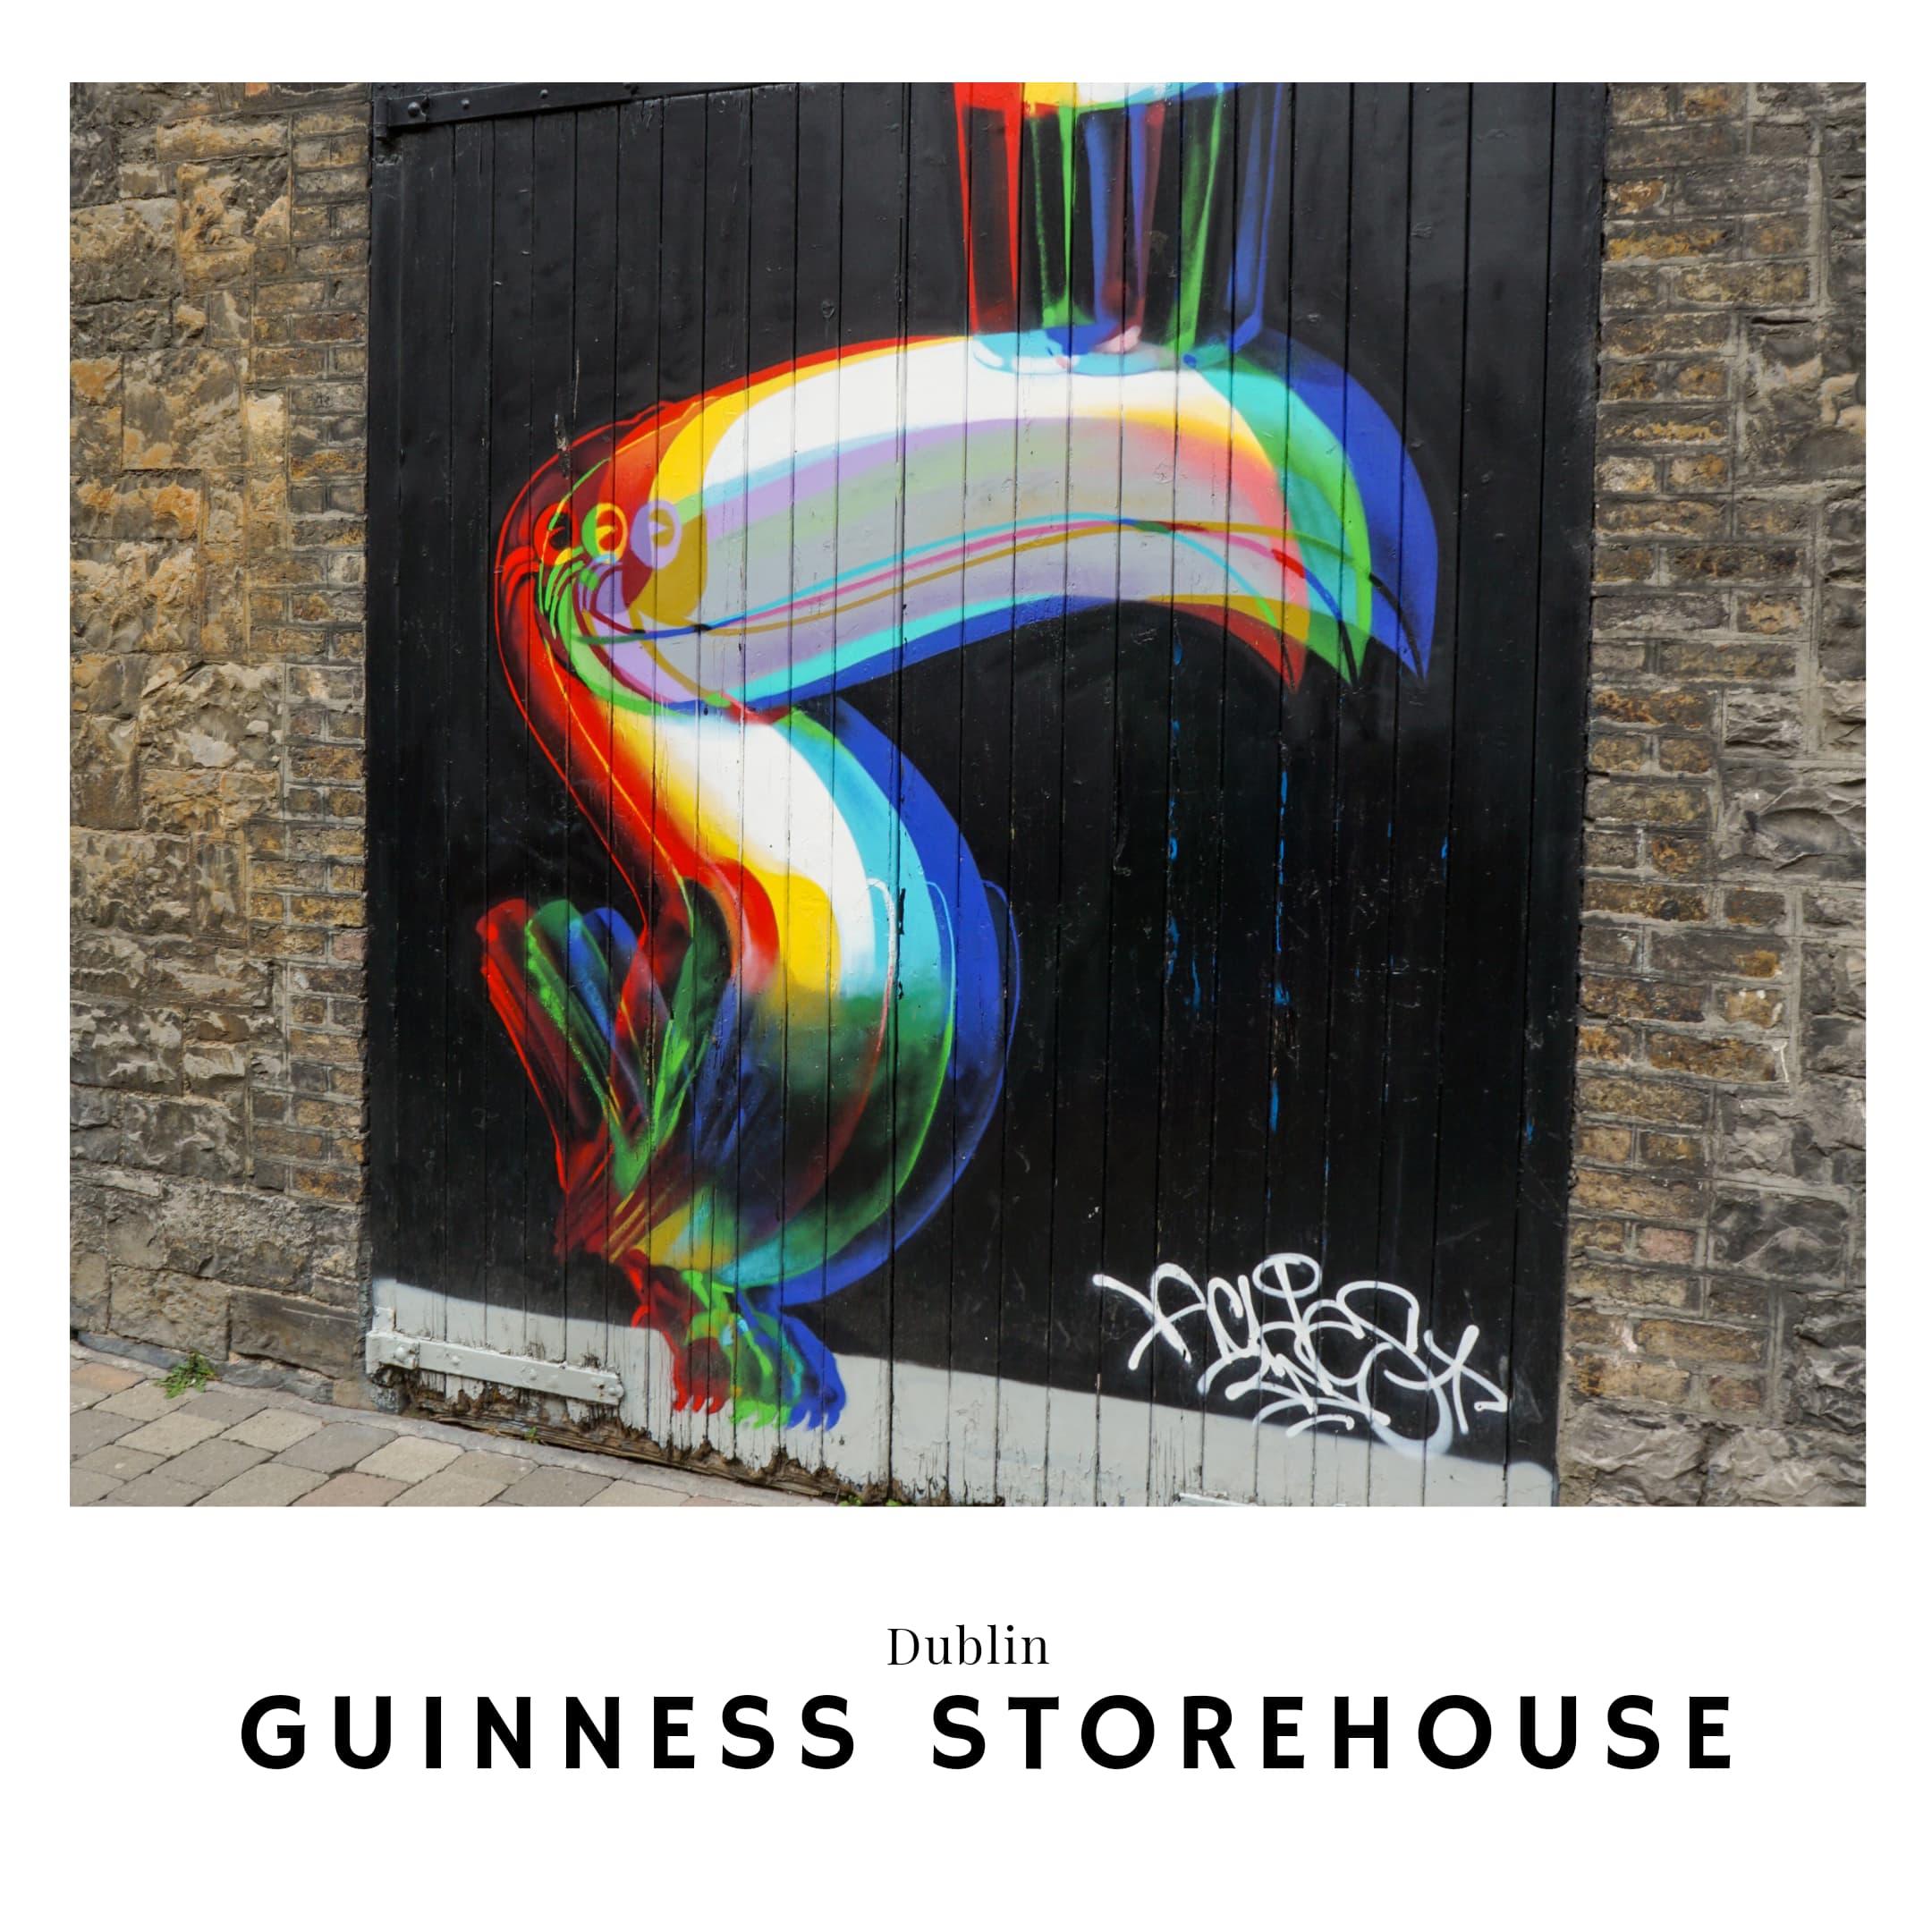 Link to the Guinness Storehouse